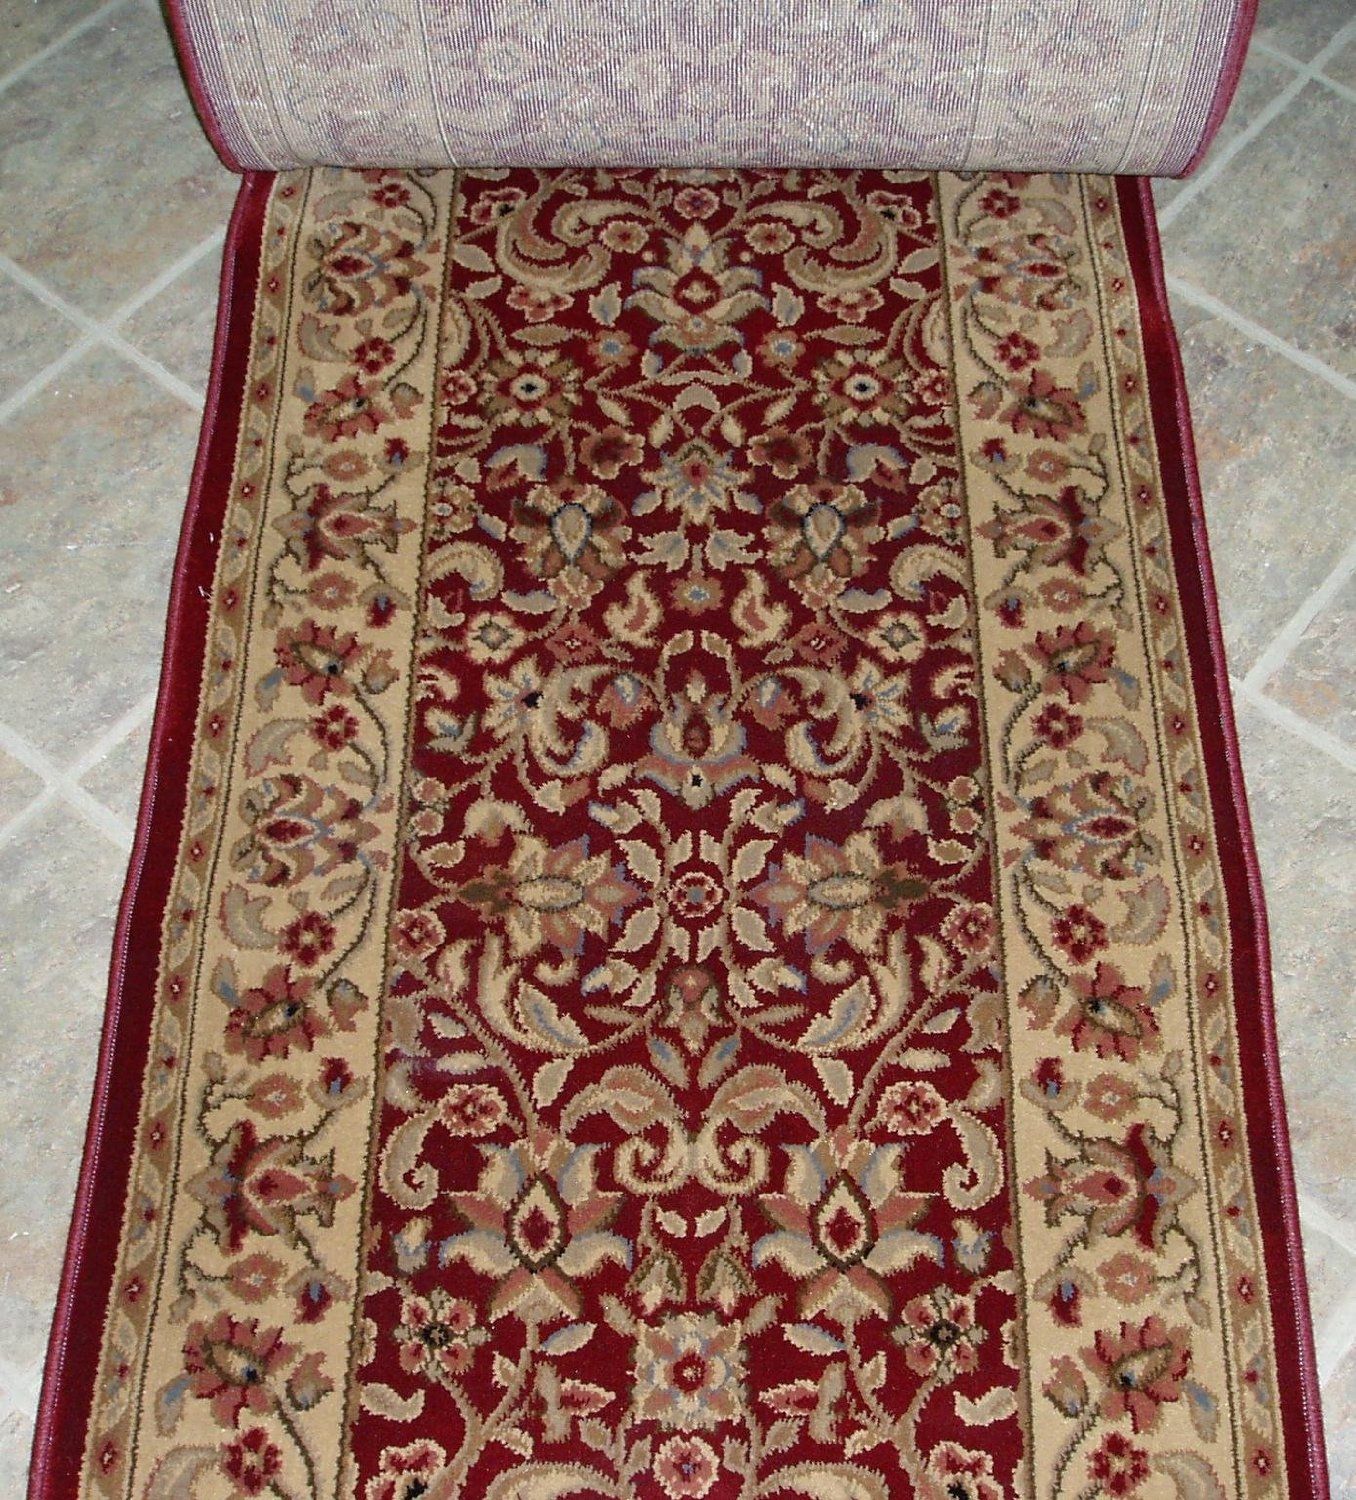 Interior Extra Long Hall Runner Rugs With Traditional Aged Regarding Extra Long Hallway Runners (View 16 of 20)